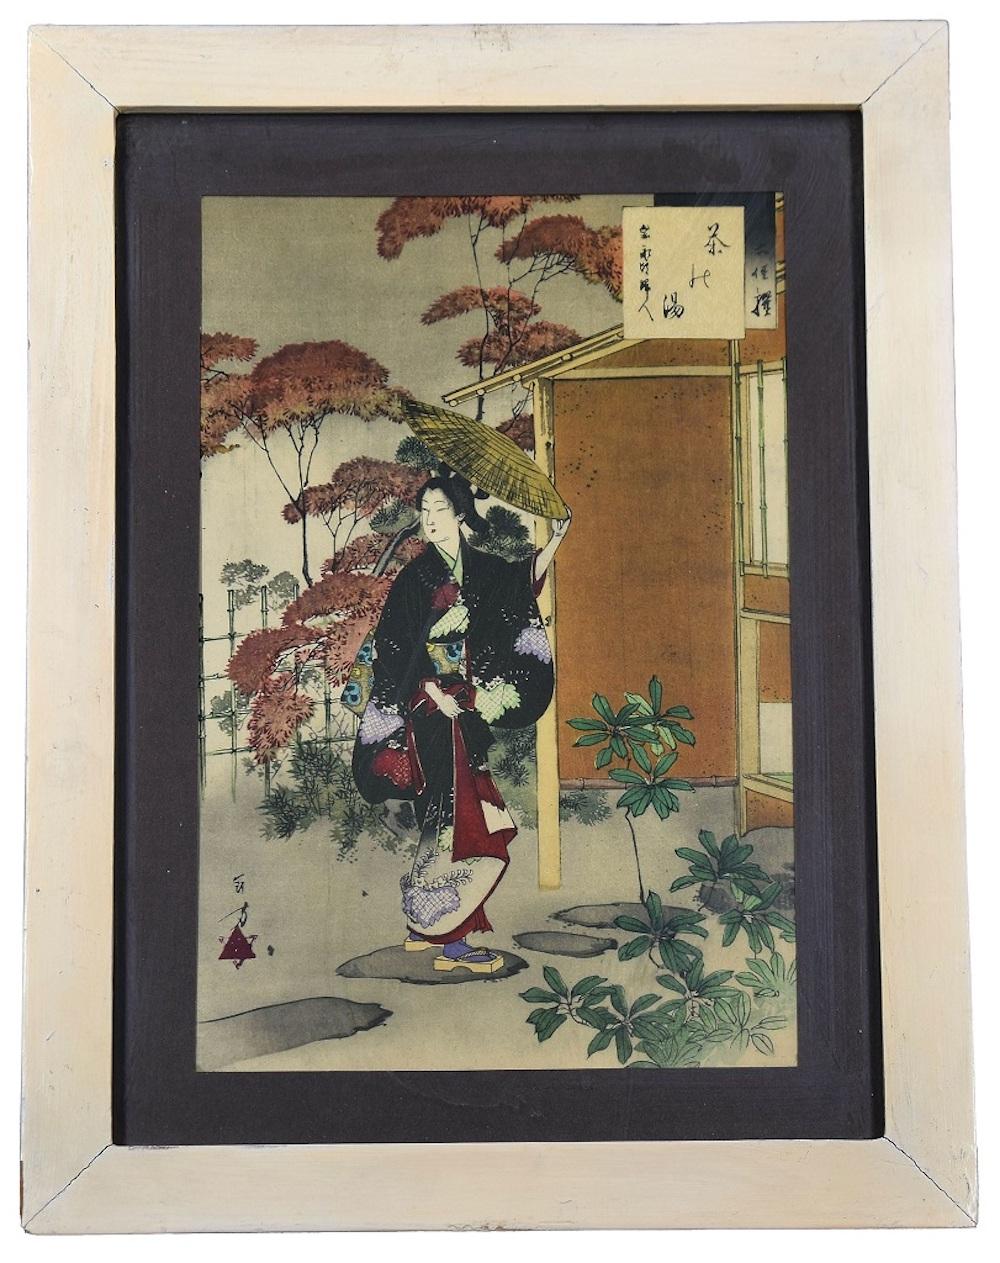 Tea Ceremony is a mixed colored offset print realized in 1959 from an original artwork by Mizuno Toshikata  (1866-1908) realized between 1891-93.

The artwork is from the harmonica book 